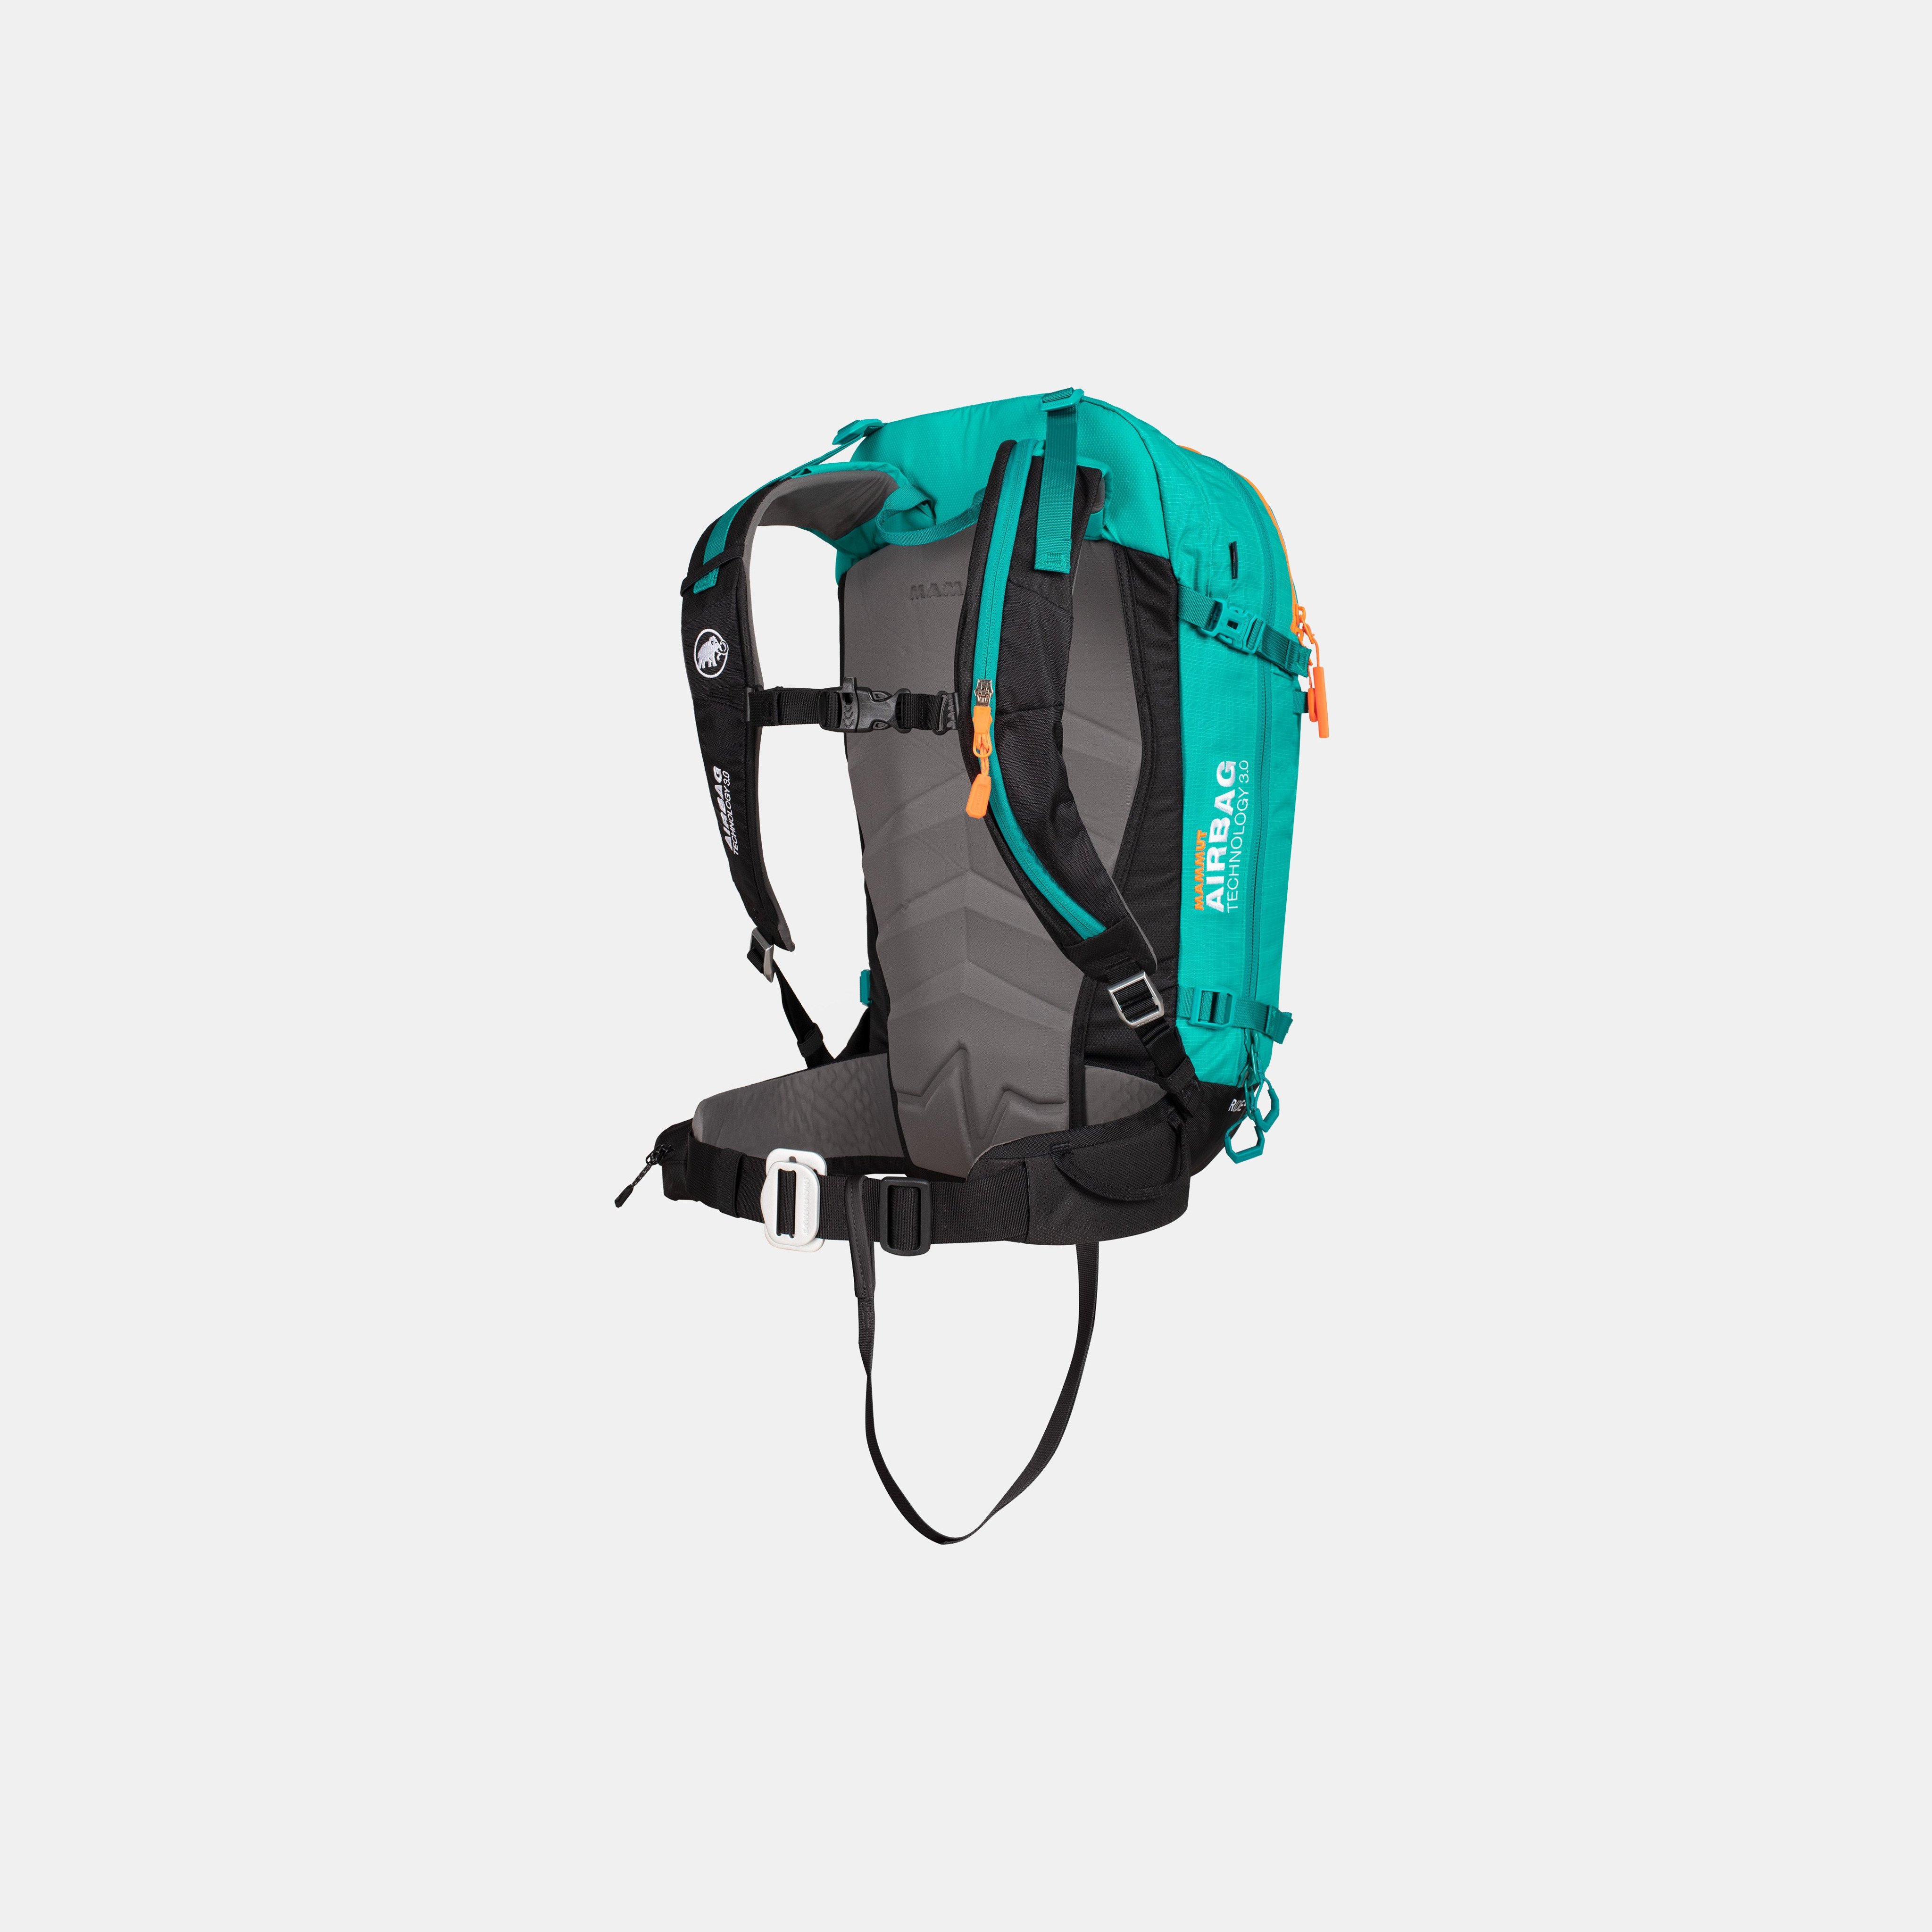 Ride Removable Airbag 3.0 product image